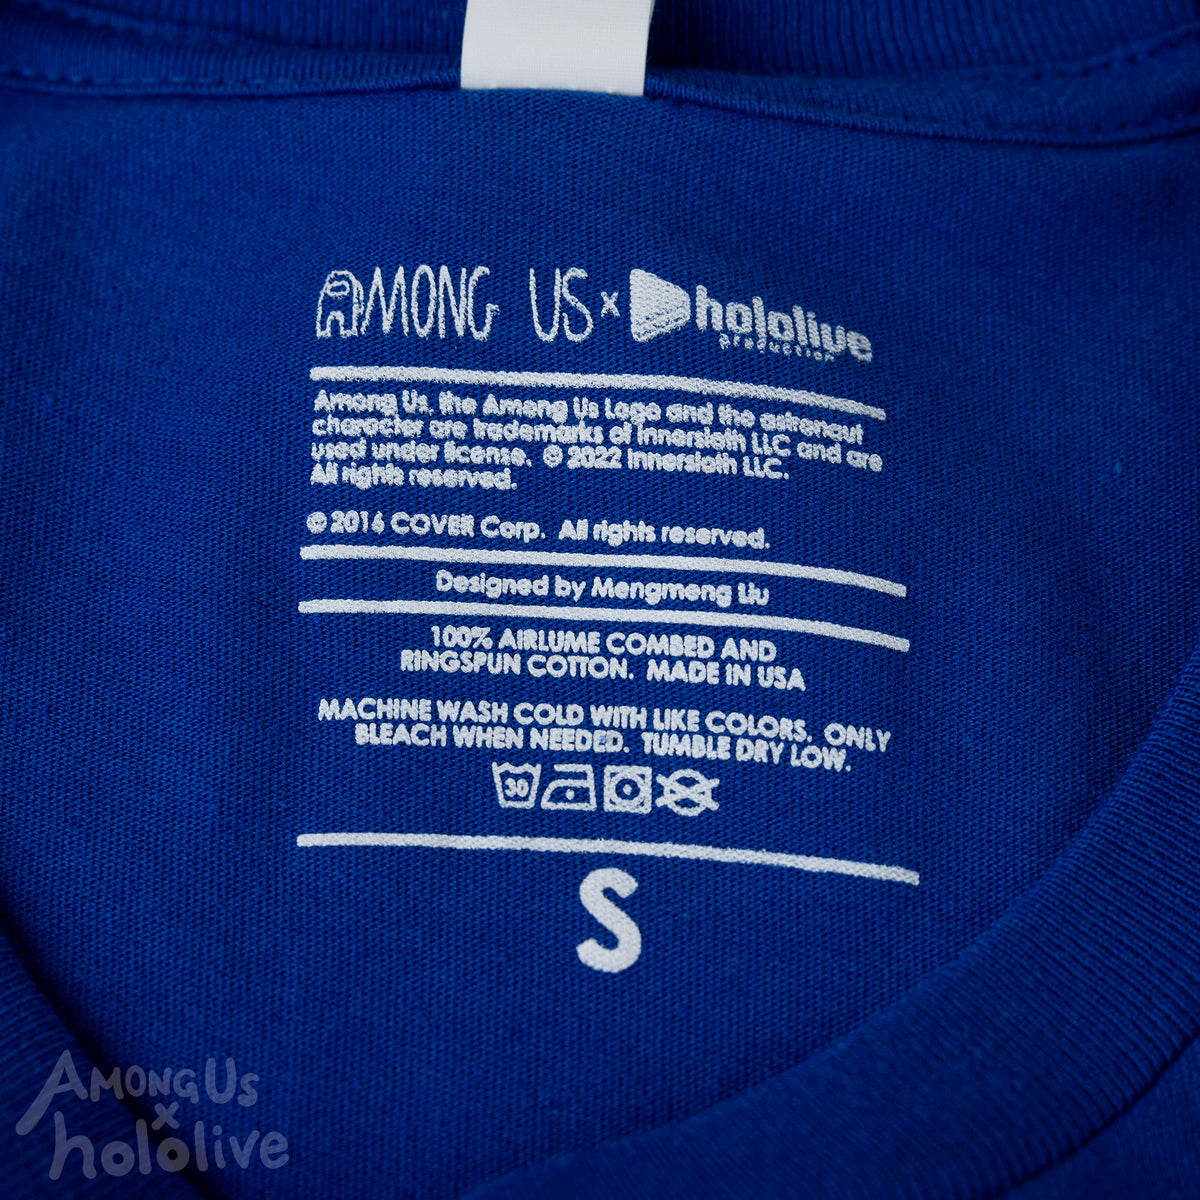 A closeup photo of the t-shirt care information and size, printed directly on the fabric.